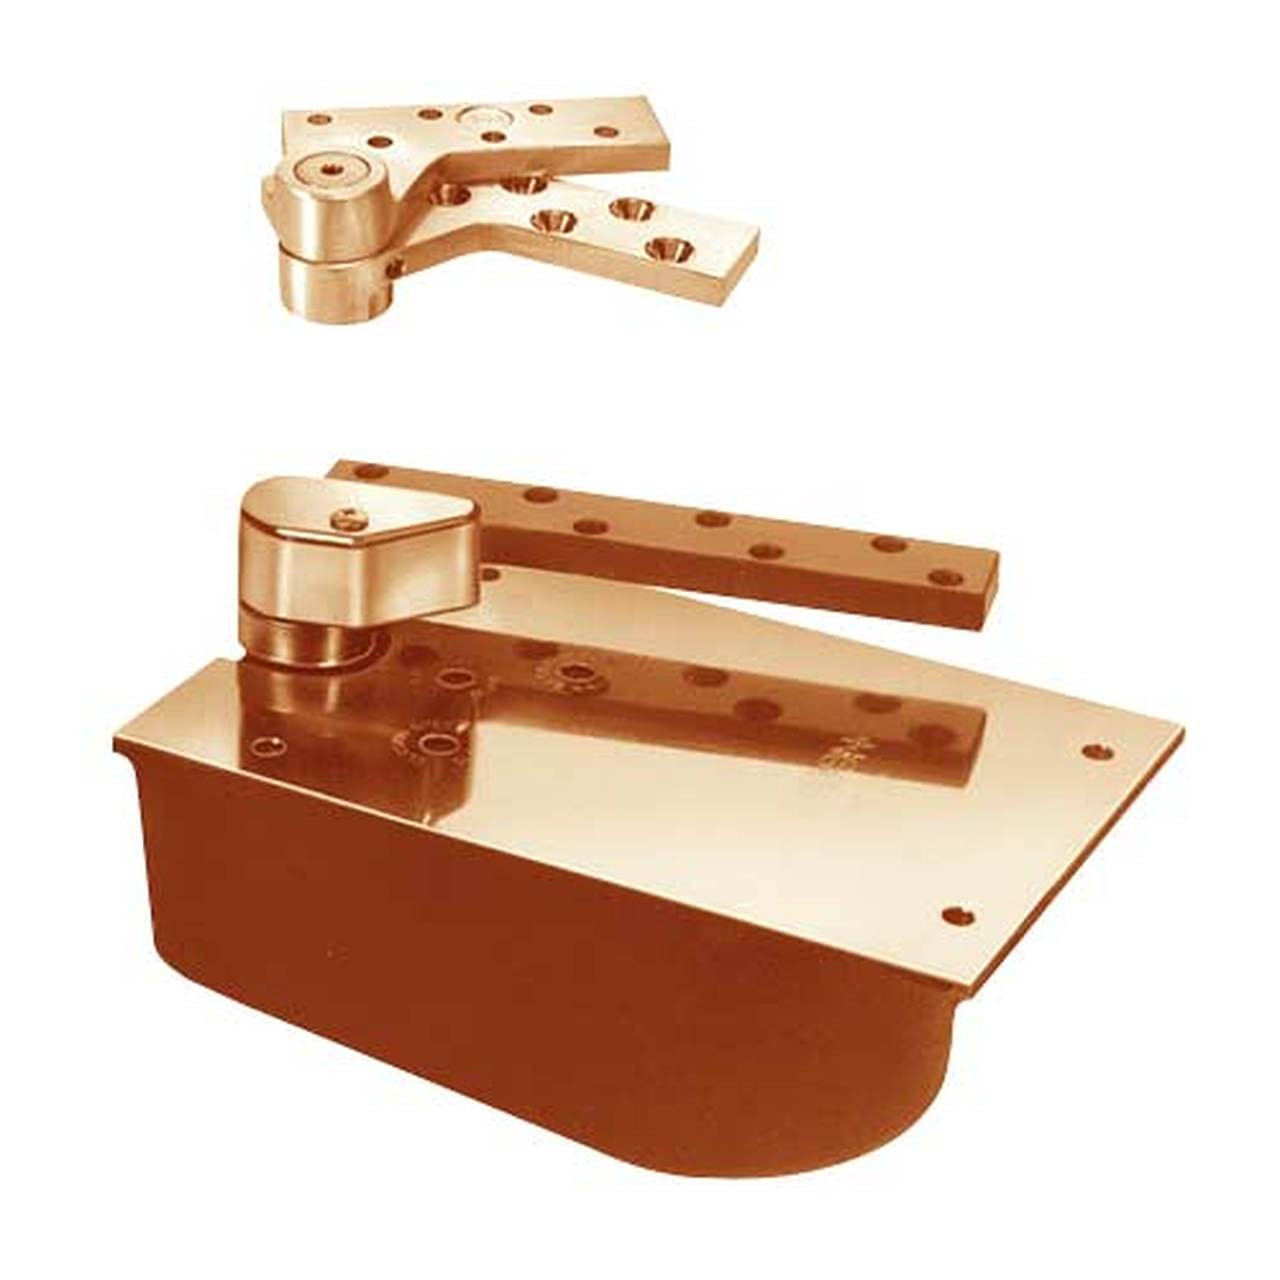 L27-85S-LCC-LH-2-1/4-612 Rixson 27 Series Extra Heavy Duty Lead Lined Offset Floor Closer in Satin Bronze Finish